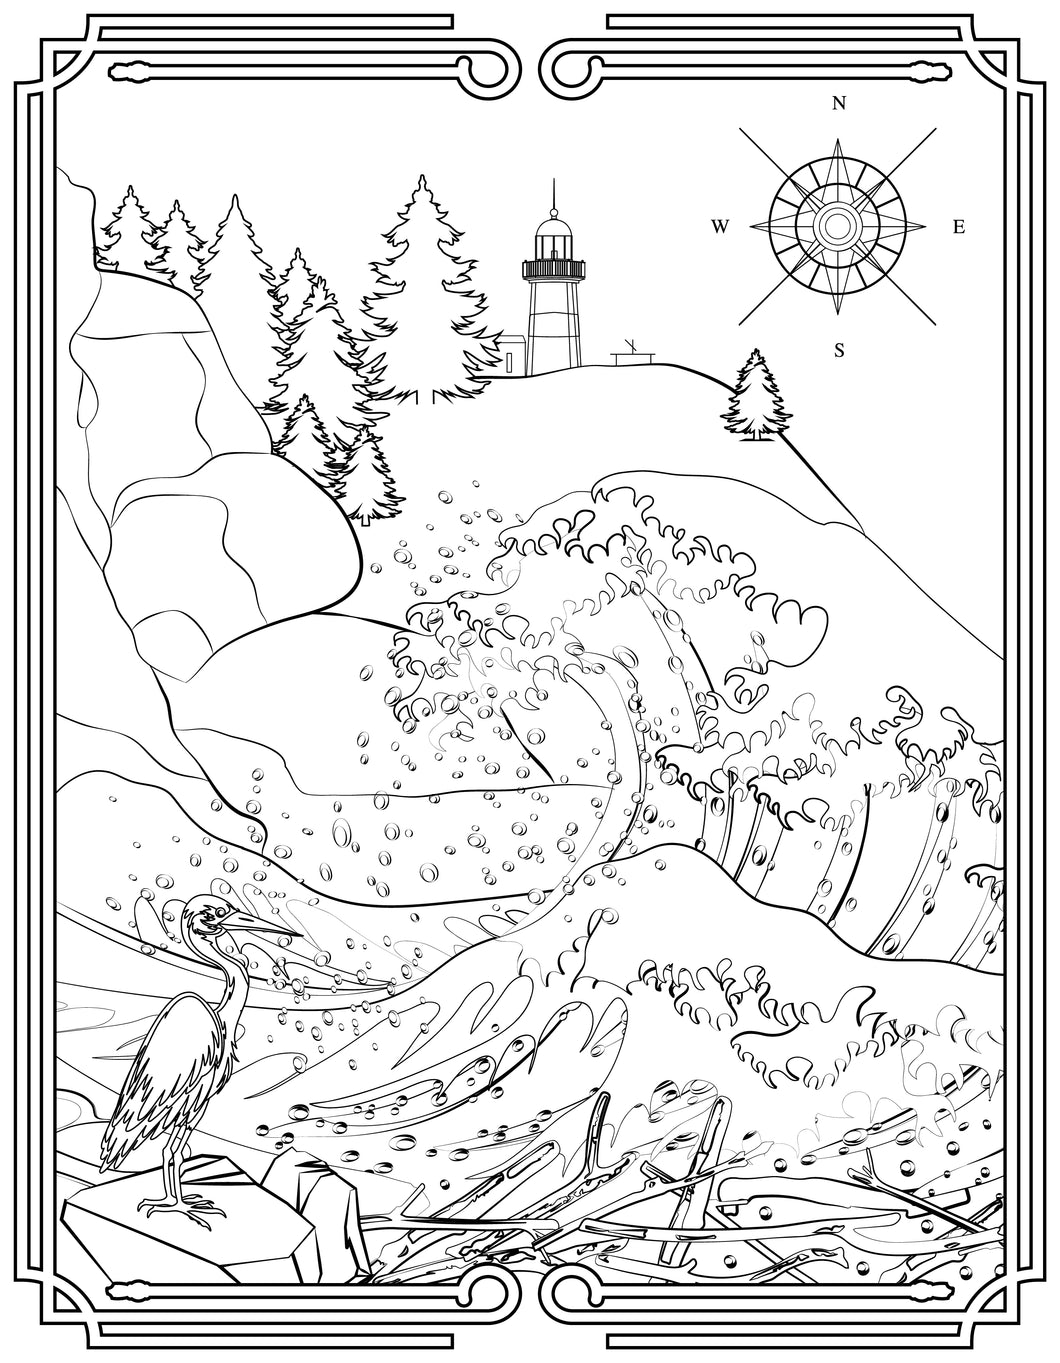 Single Coloring Book Page - Cape Disappointment Lighthouse, Washington - Digital Print-from-Home